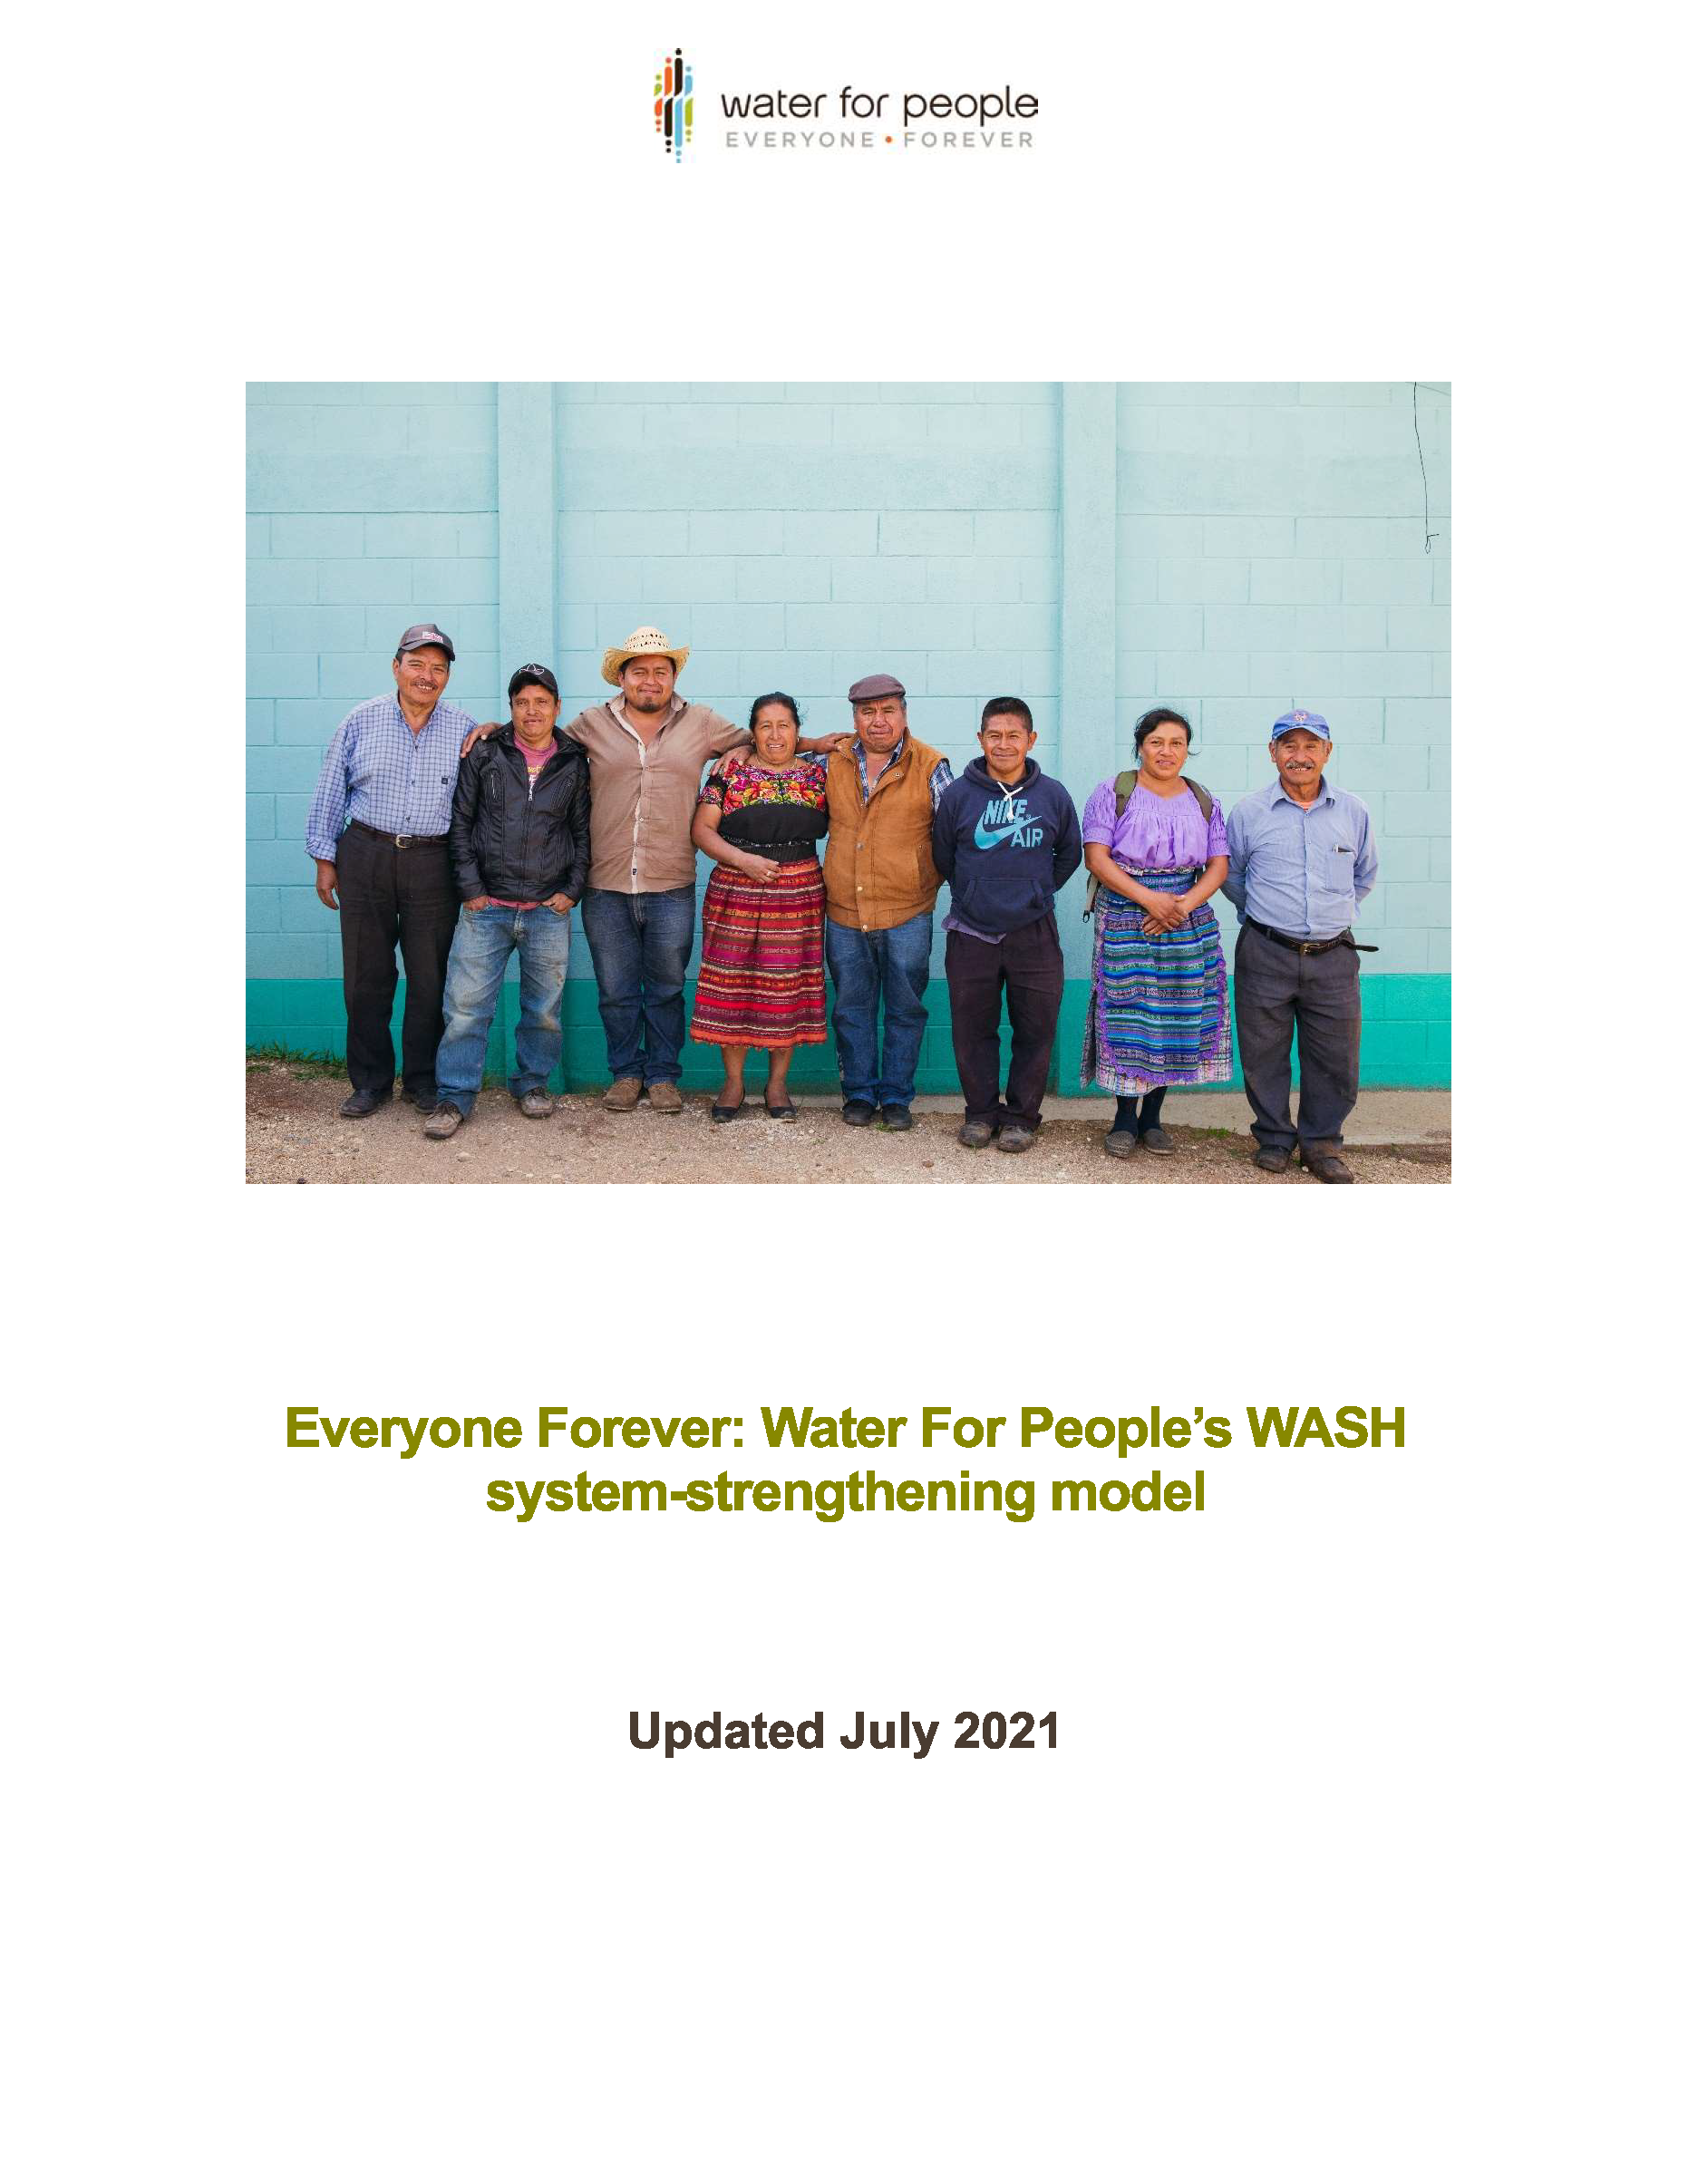 Briefing Note Cover Page. There is a large photo of eight people standing in a line. There are two women and six men. They are outside on a dirt path in front of a large blue concrete brick wall.